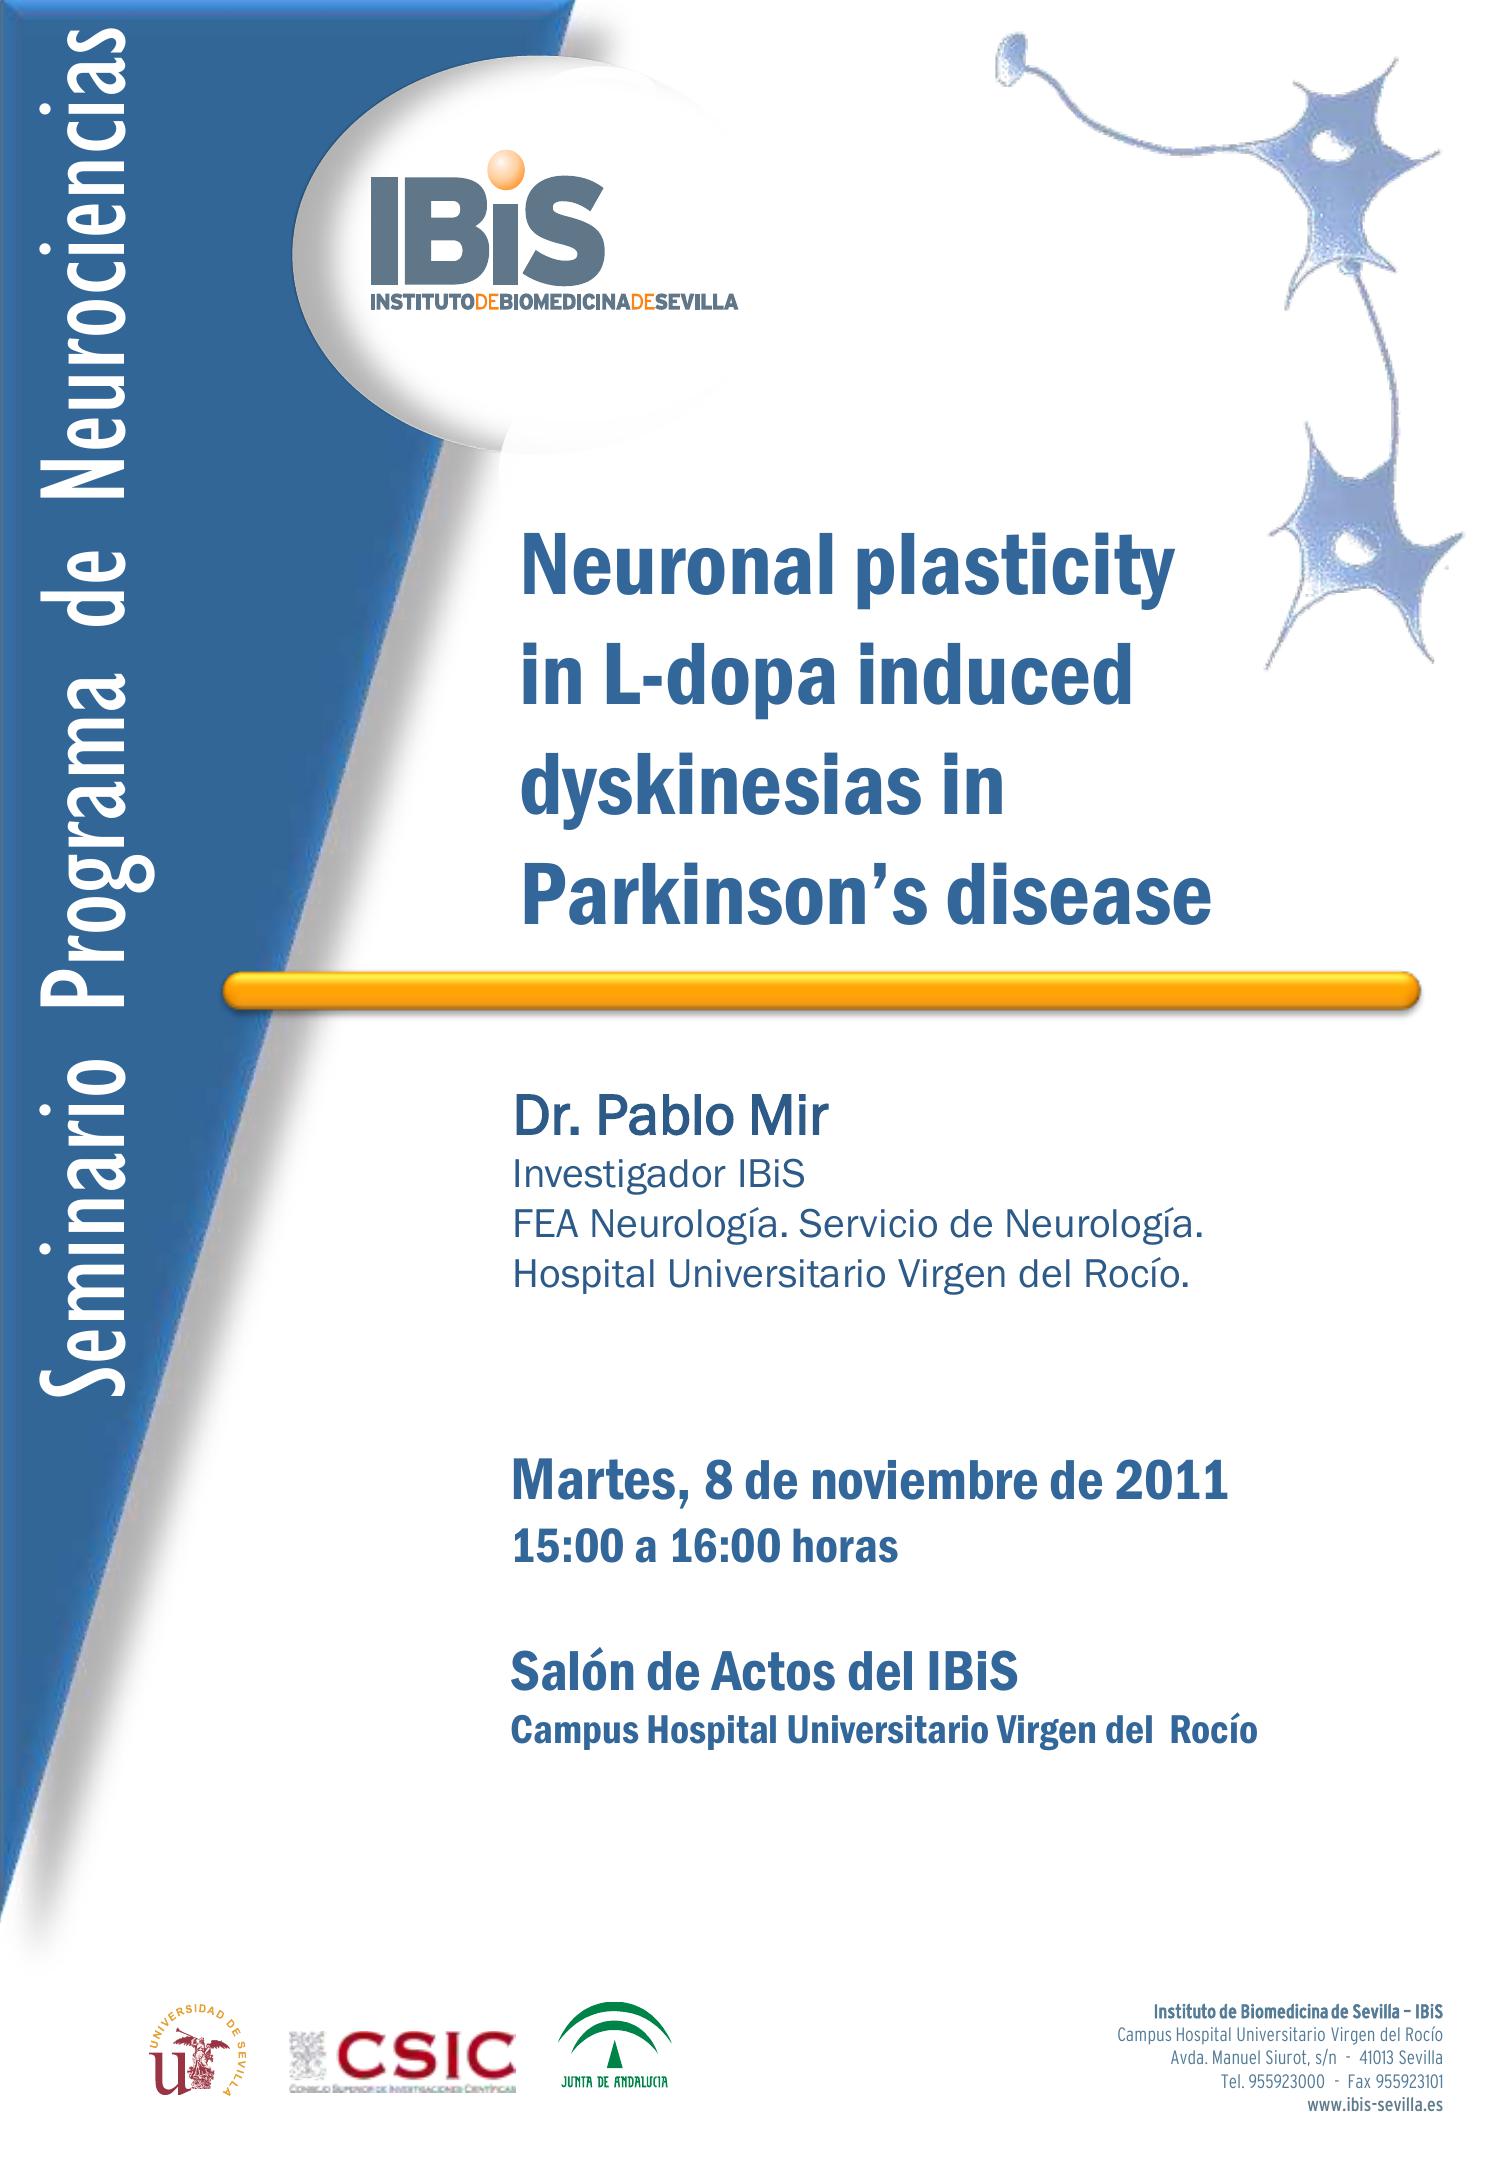 Poster: Neuronal plasticity in L-dopa induced dyskinesias in Parkinson's disease